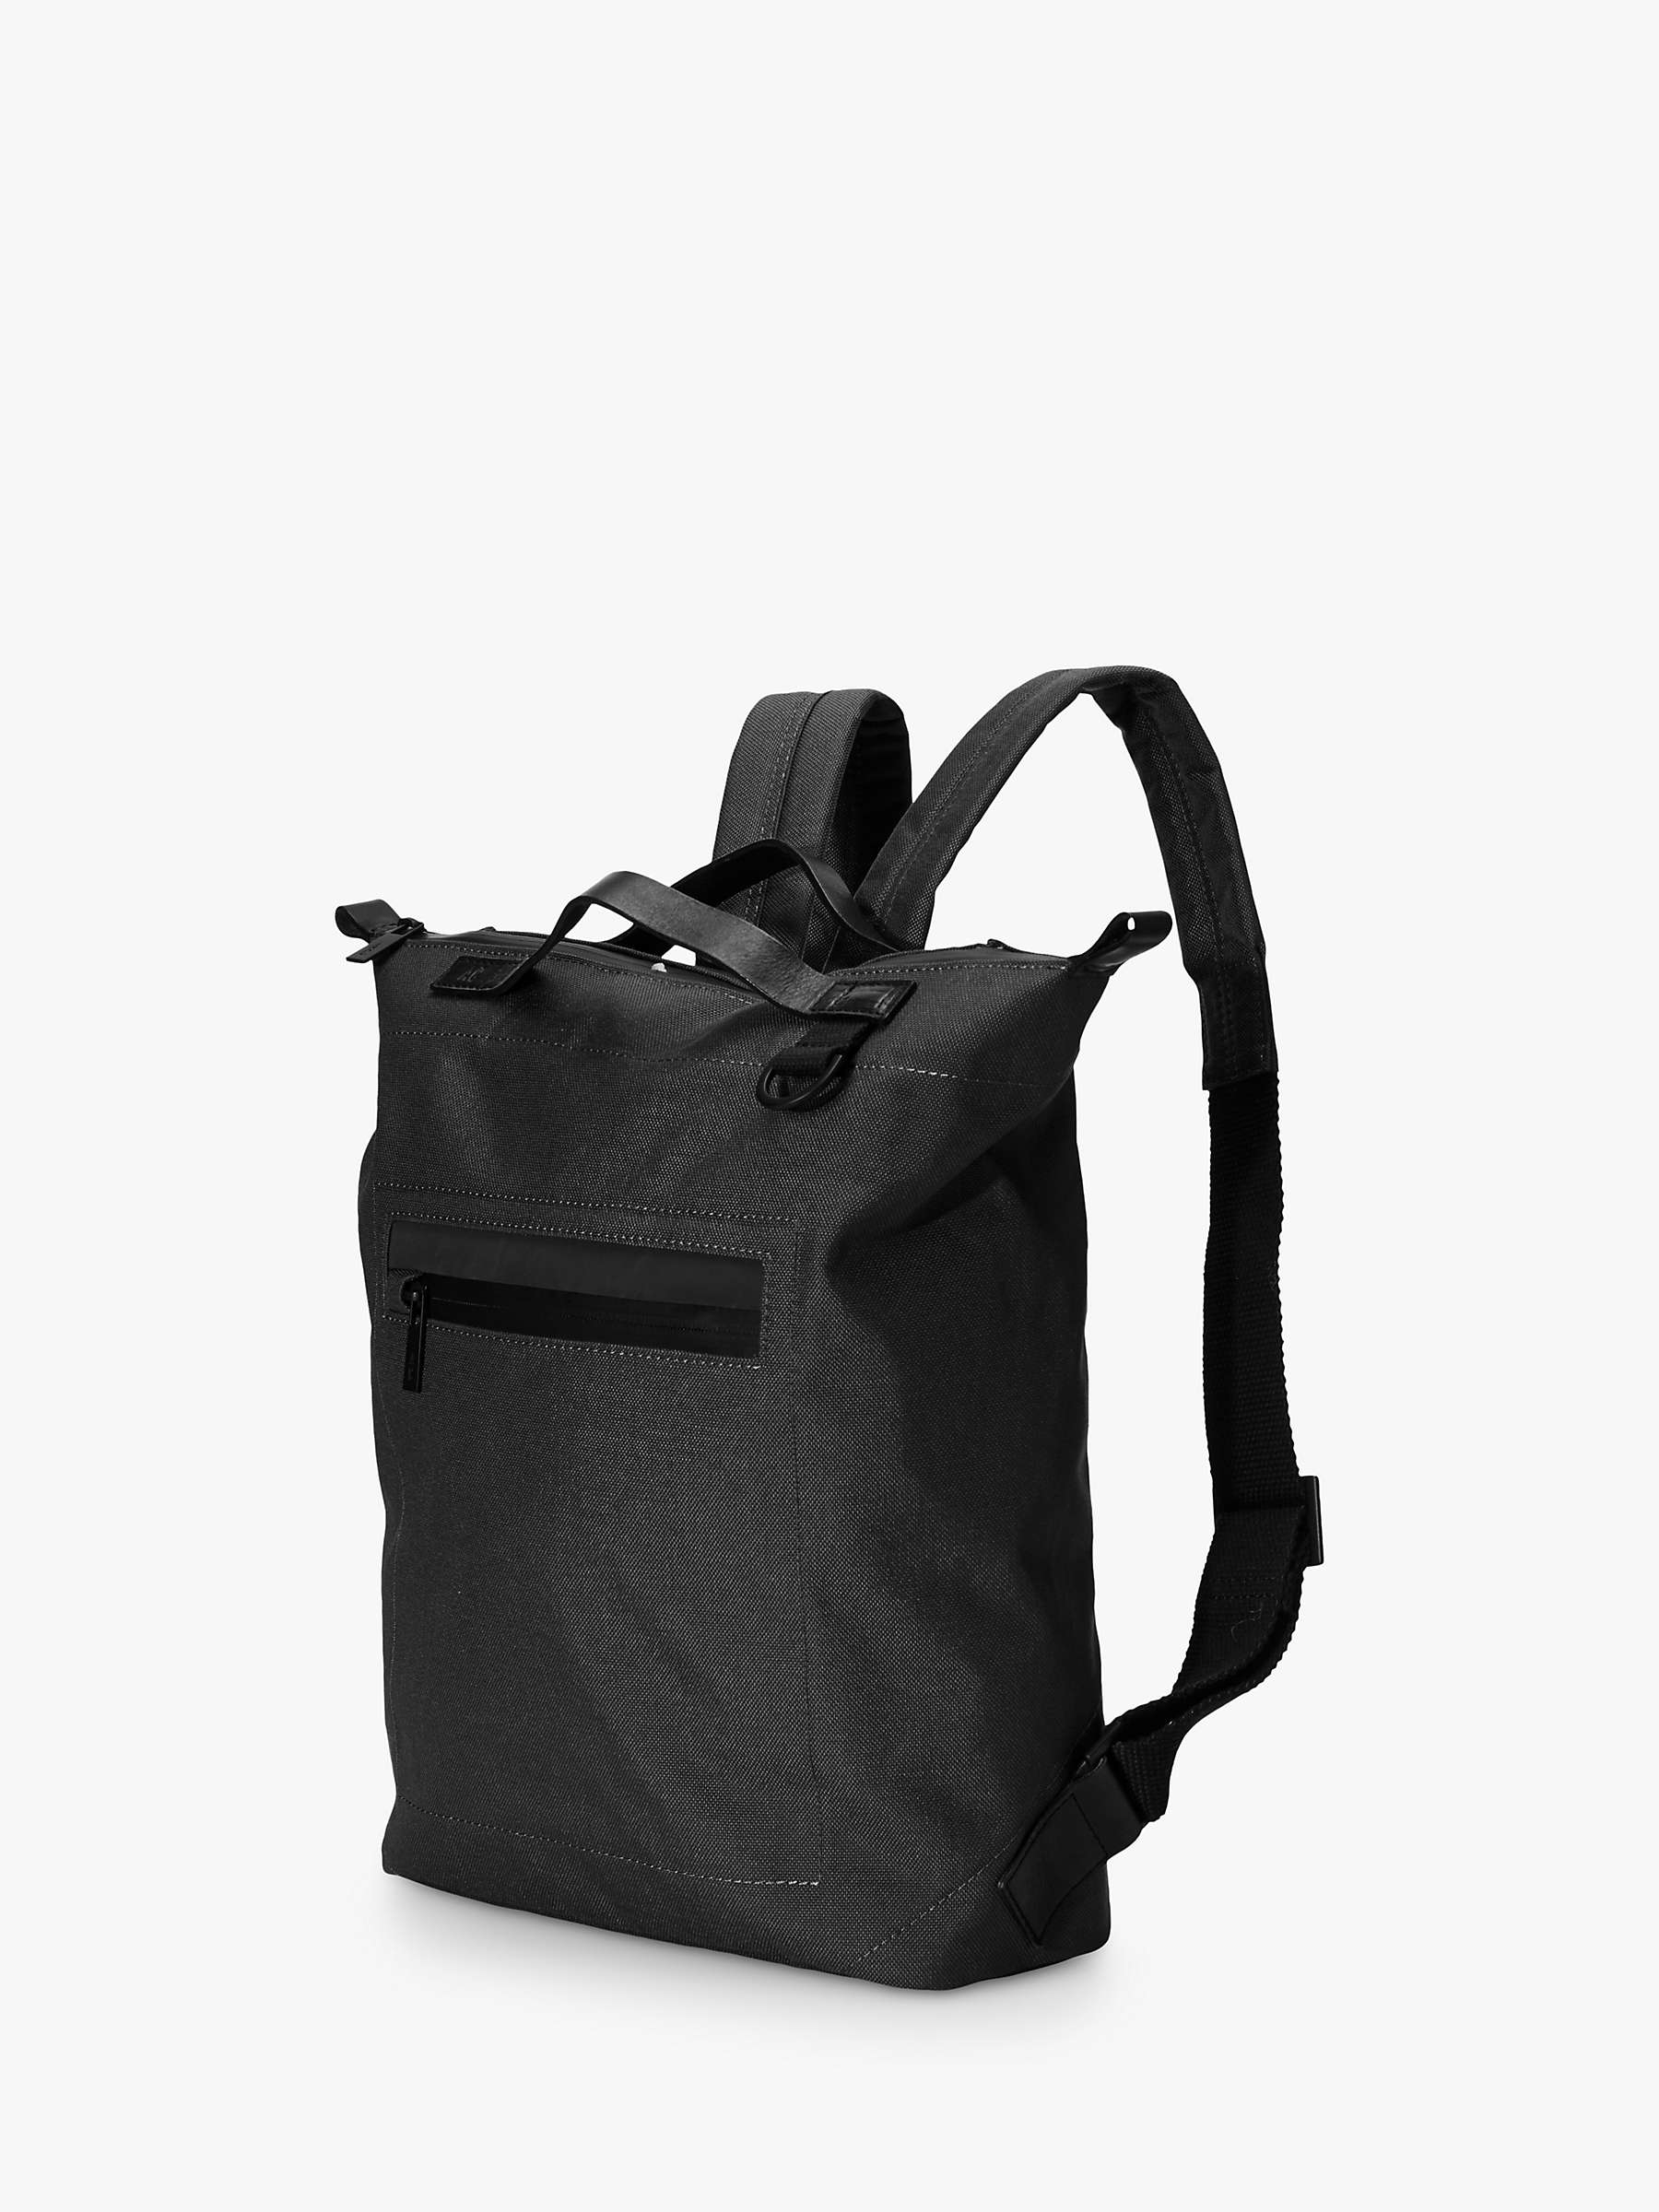 Buy Ally Capellino Mini Hoy Travel Cycle Recycled Backpack, Black Online at johnlewis.com